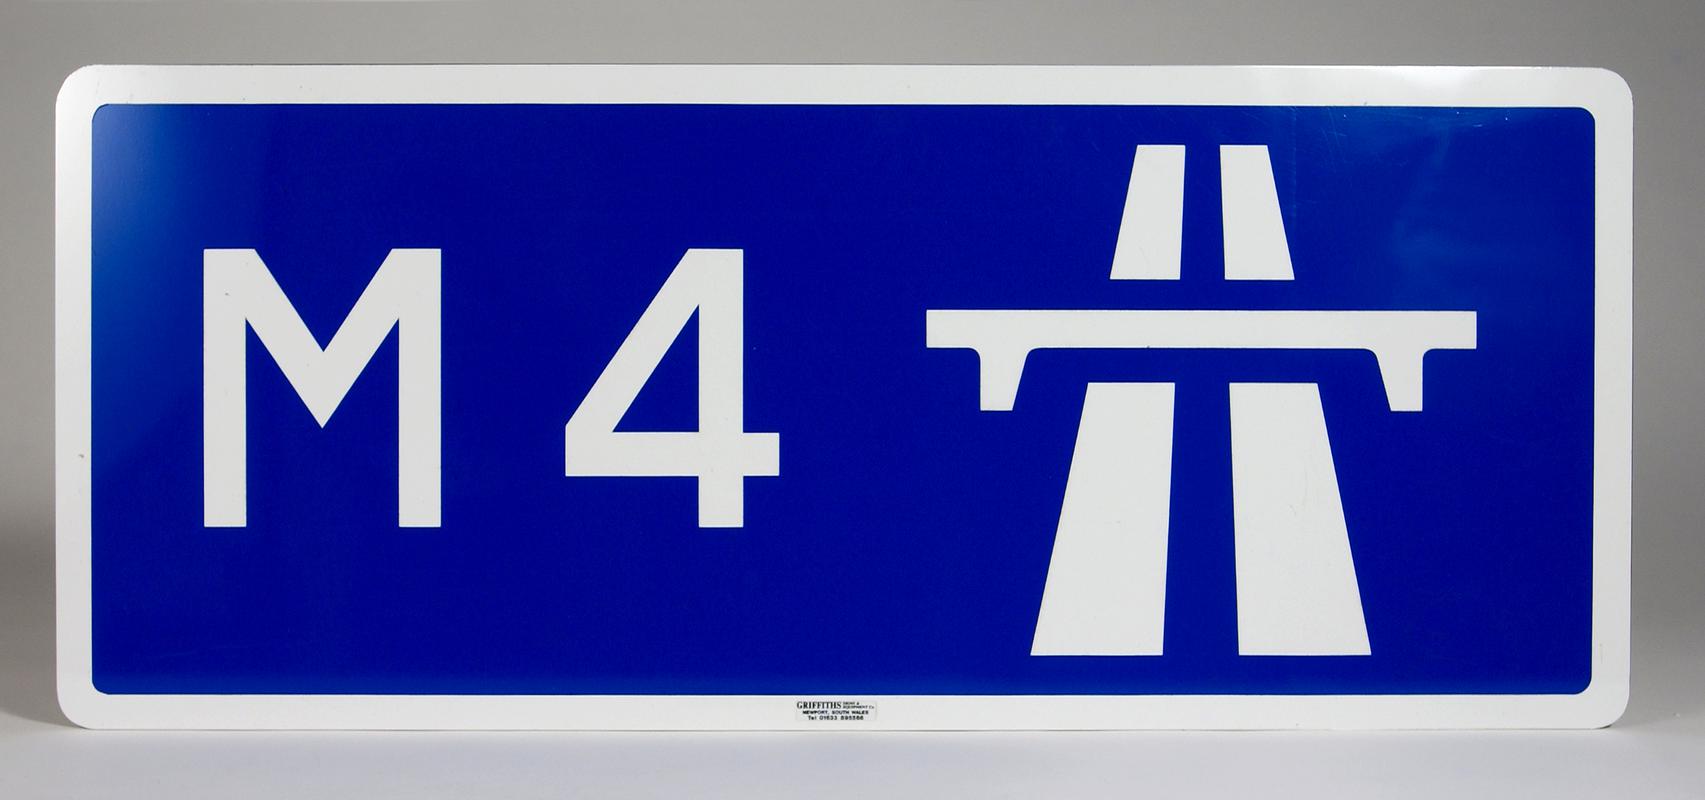 M4 road sign made by Griffiths Signs &amp; Equipment Company of Rogerstone